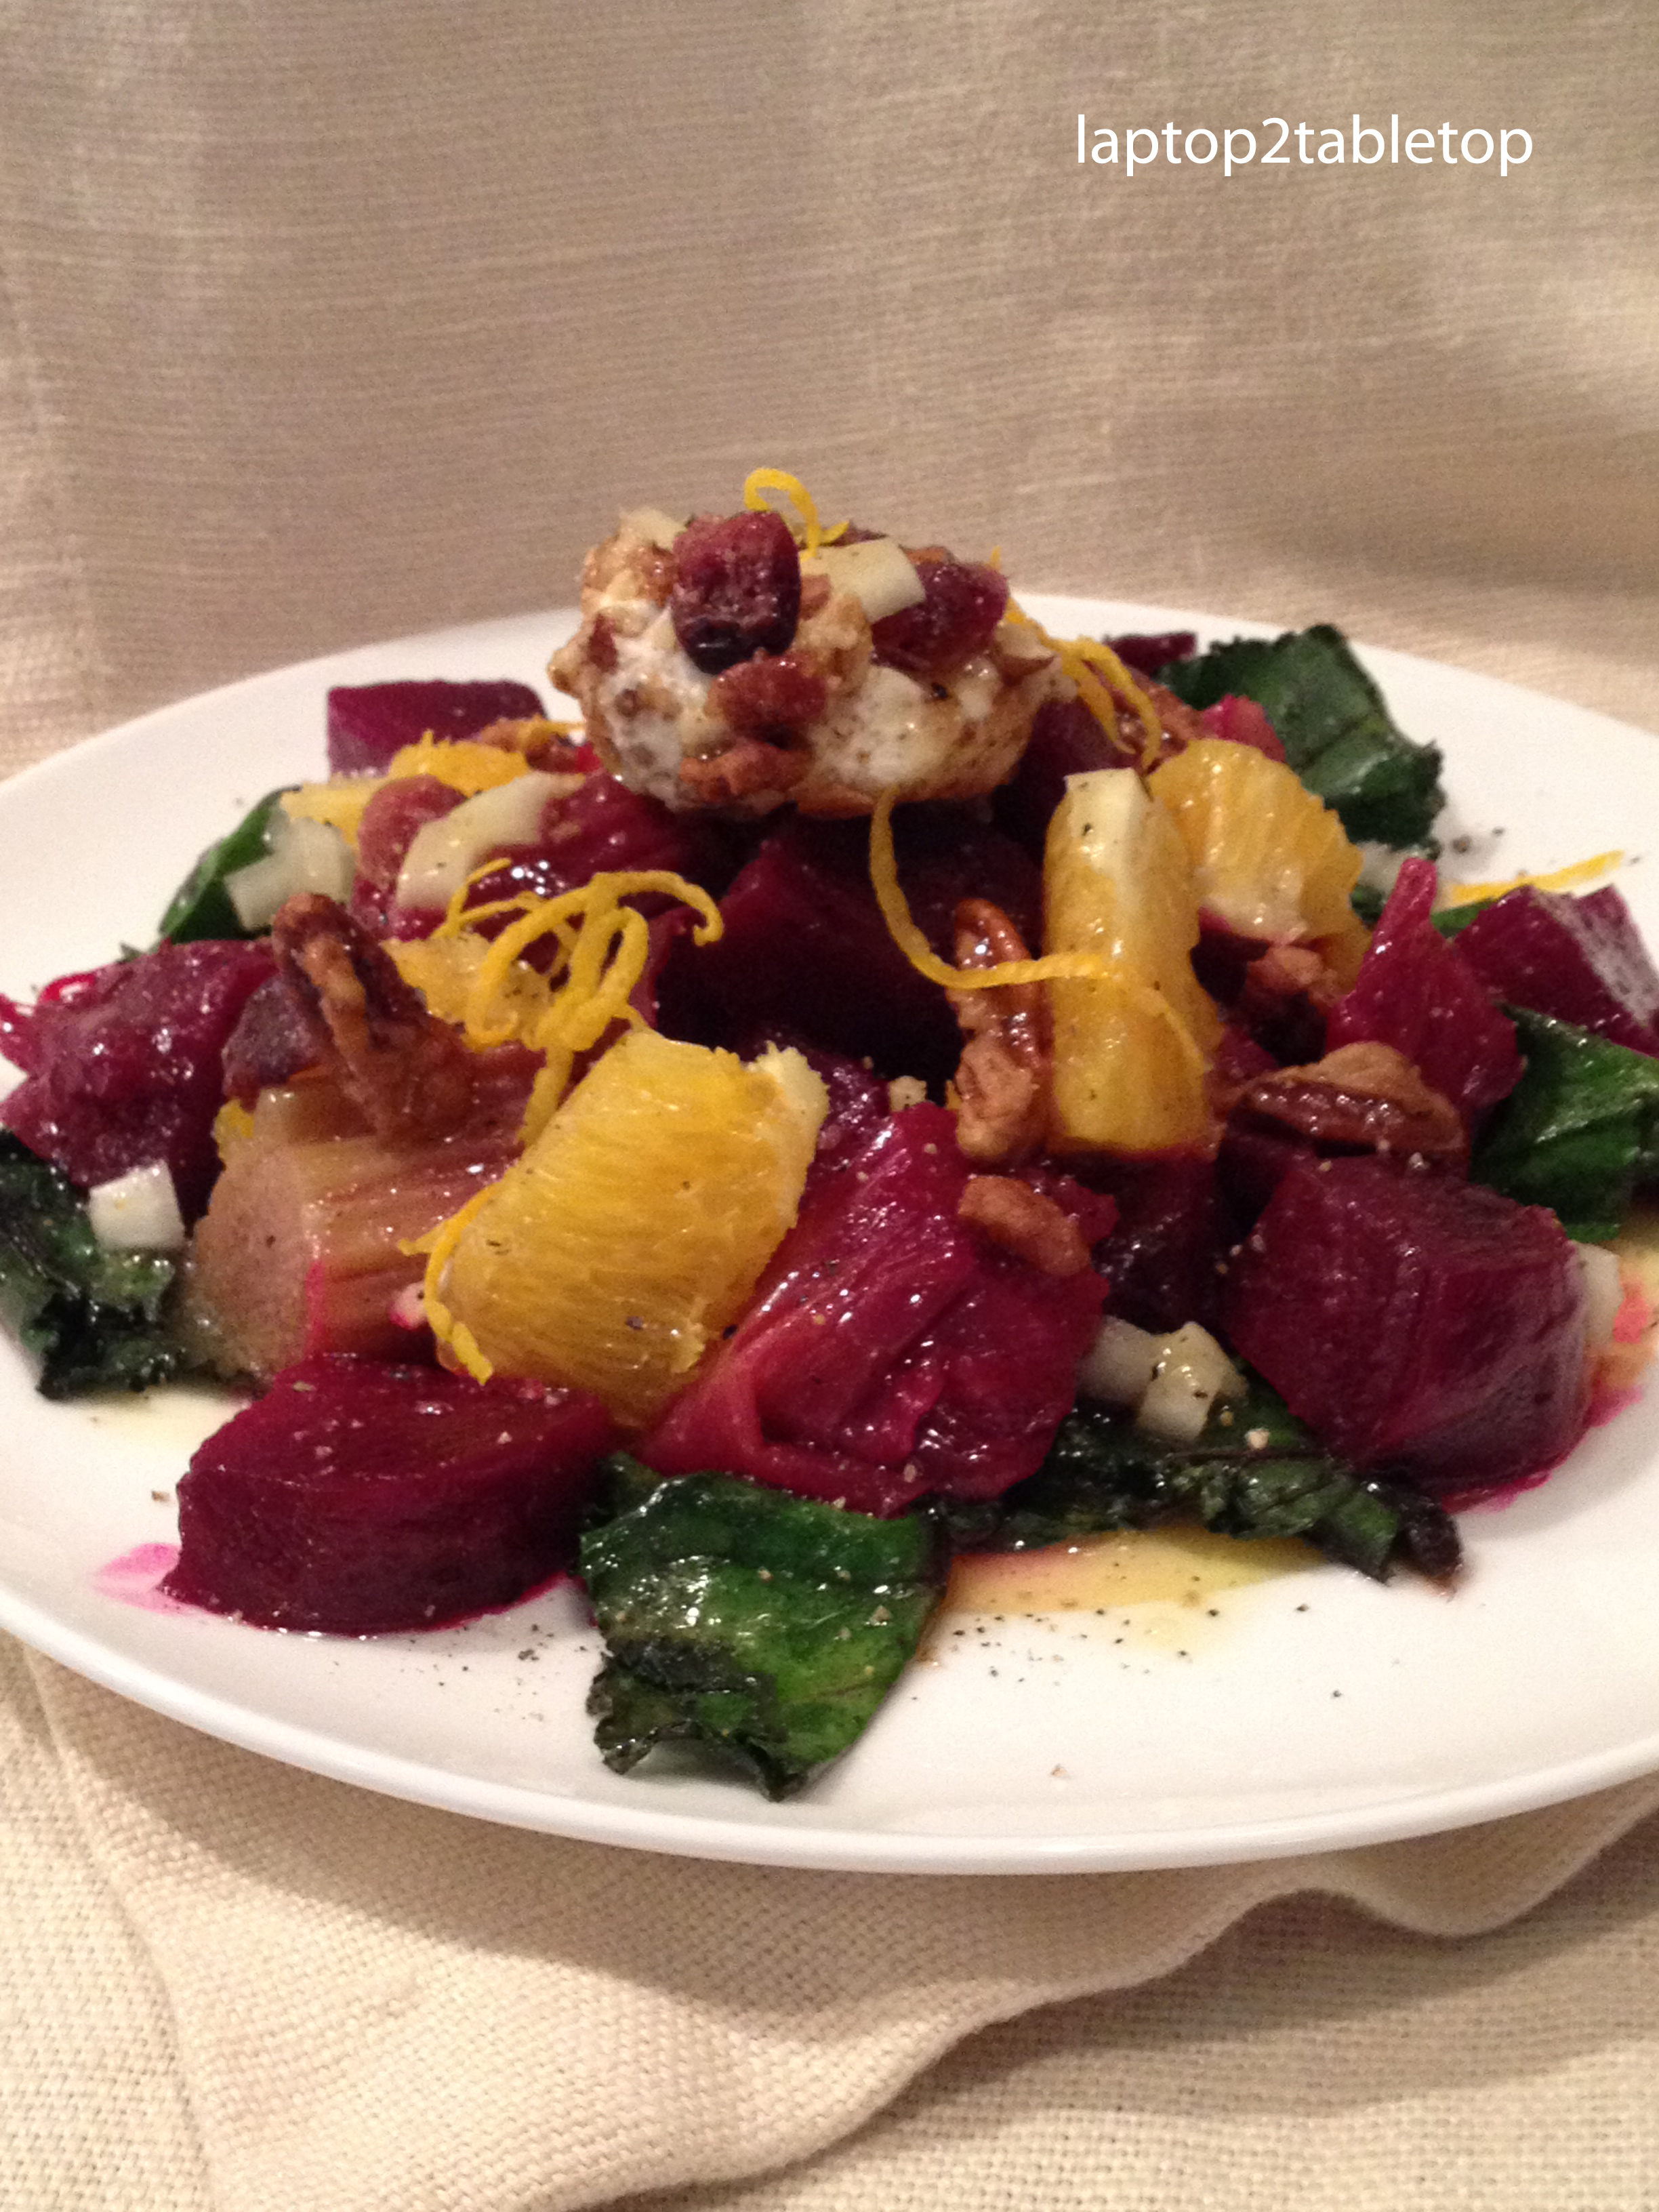 Beets Salad Goat Cheese